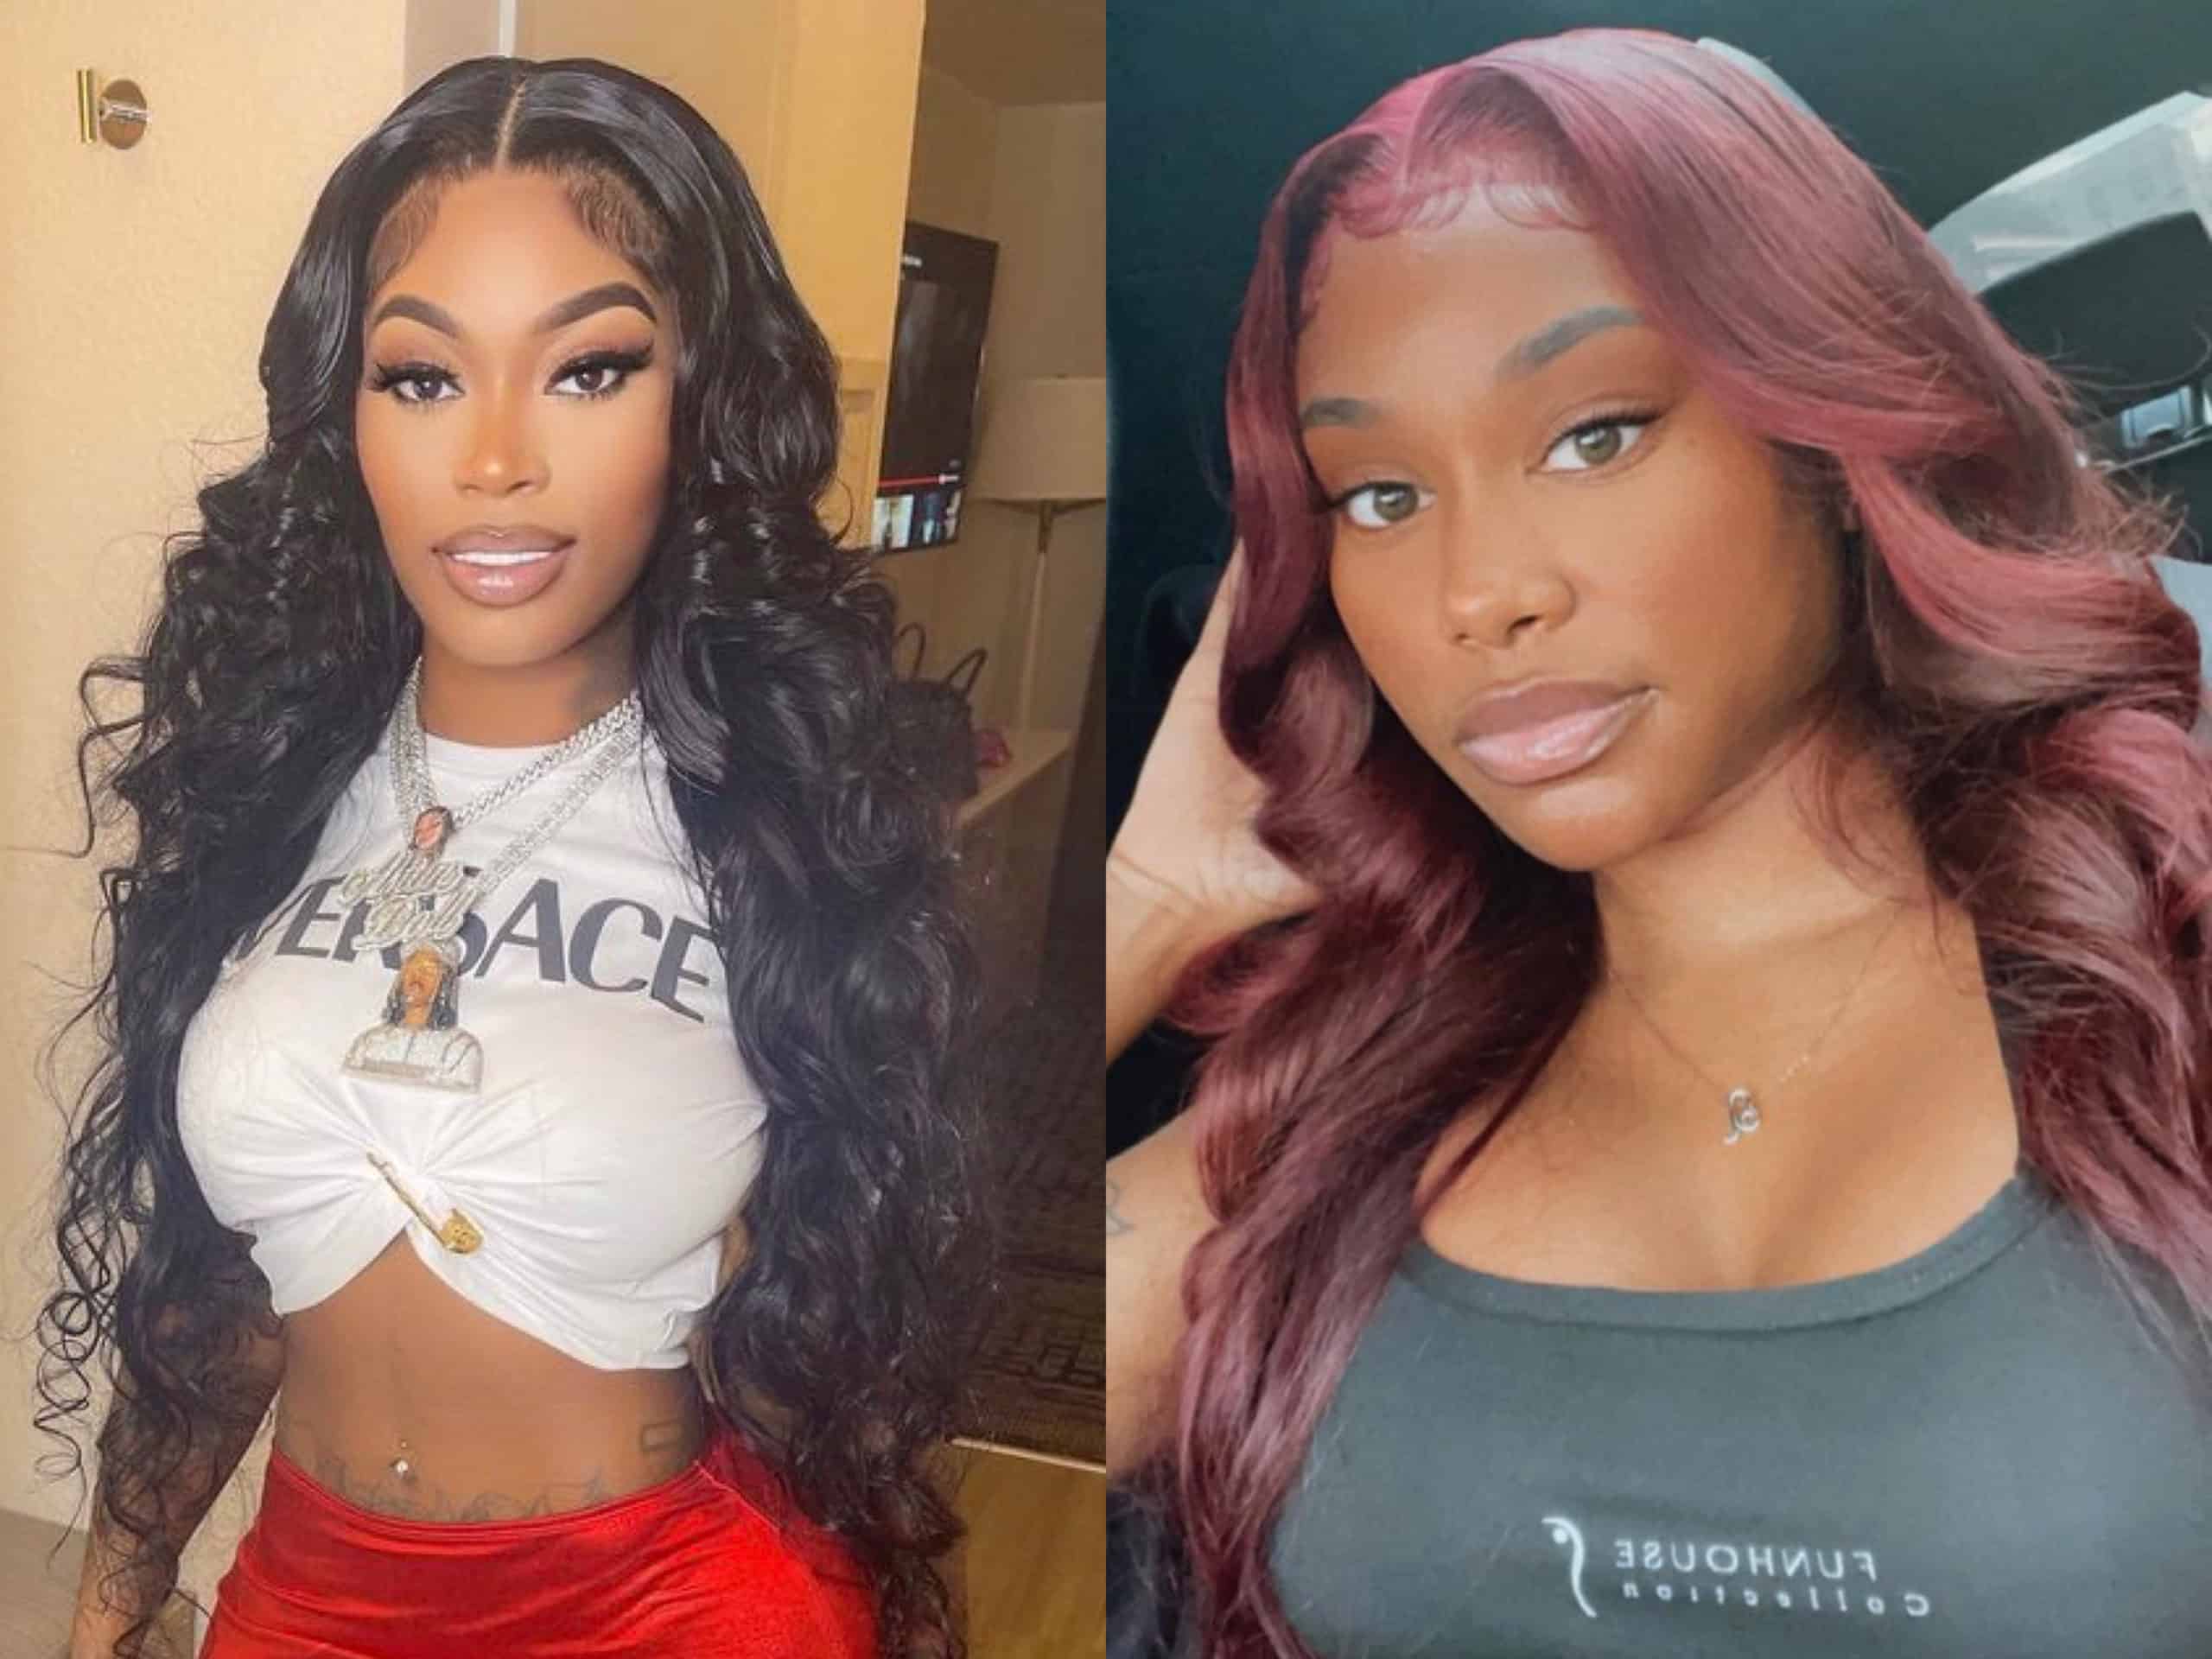 Asian Doll and King Von's baby mama Kema call each other out over Twitter and bring up things that were said and done in the past.